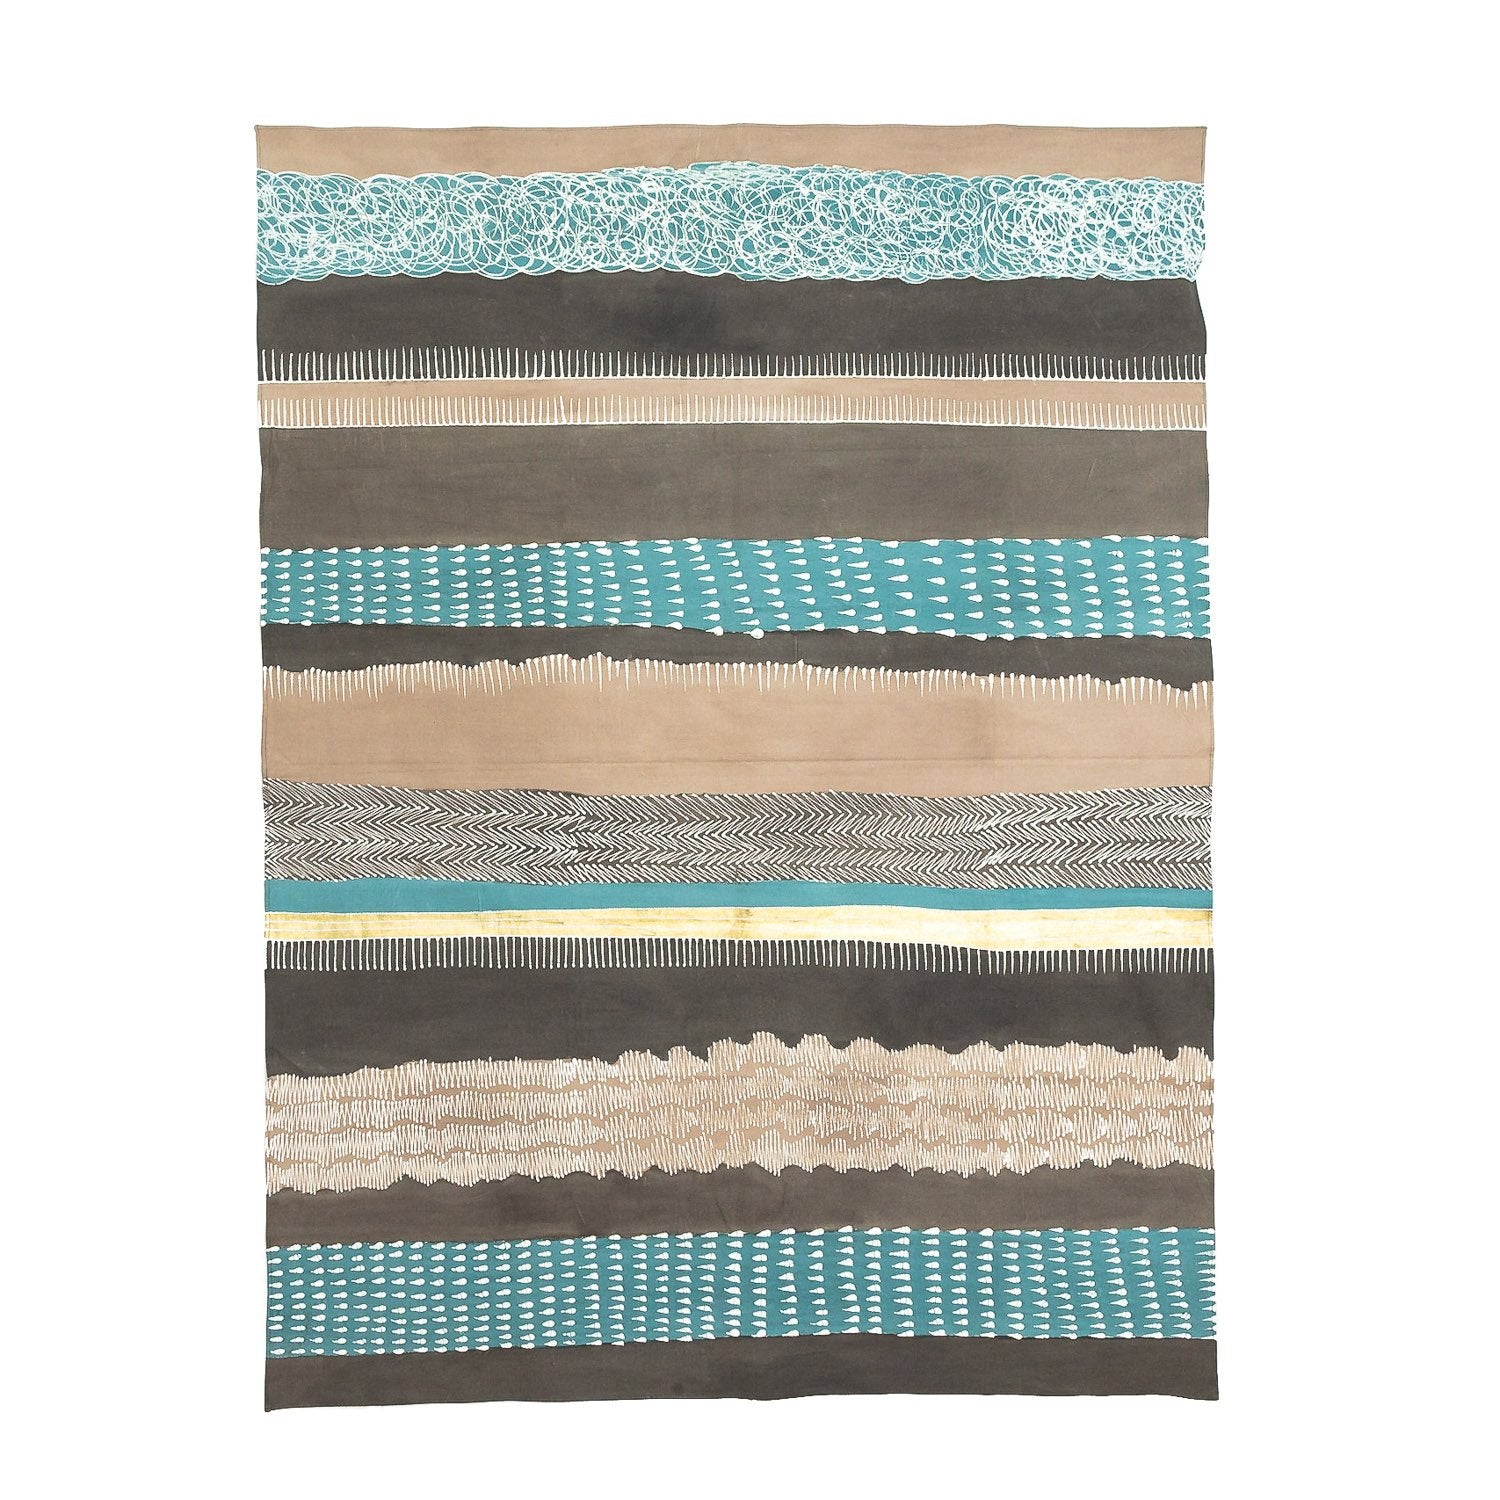 Hand made african tablecloth with geometric print in teal and grey colours